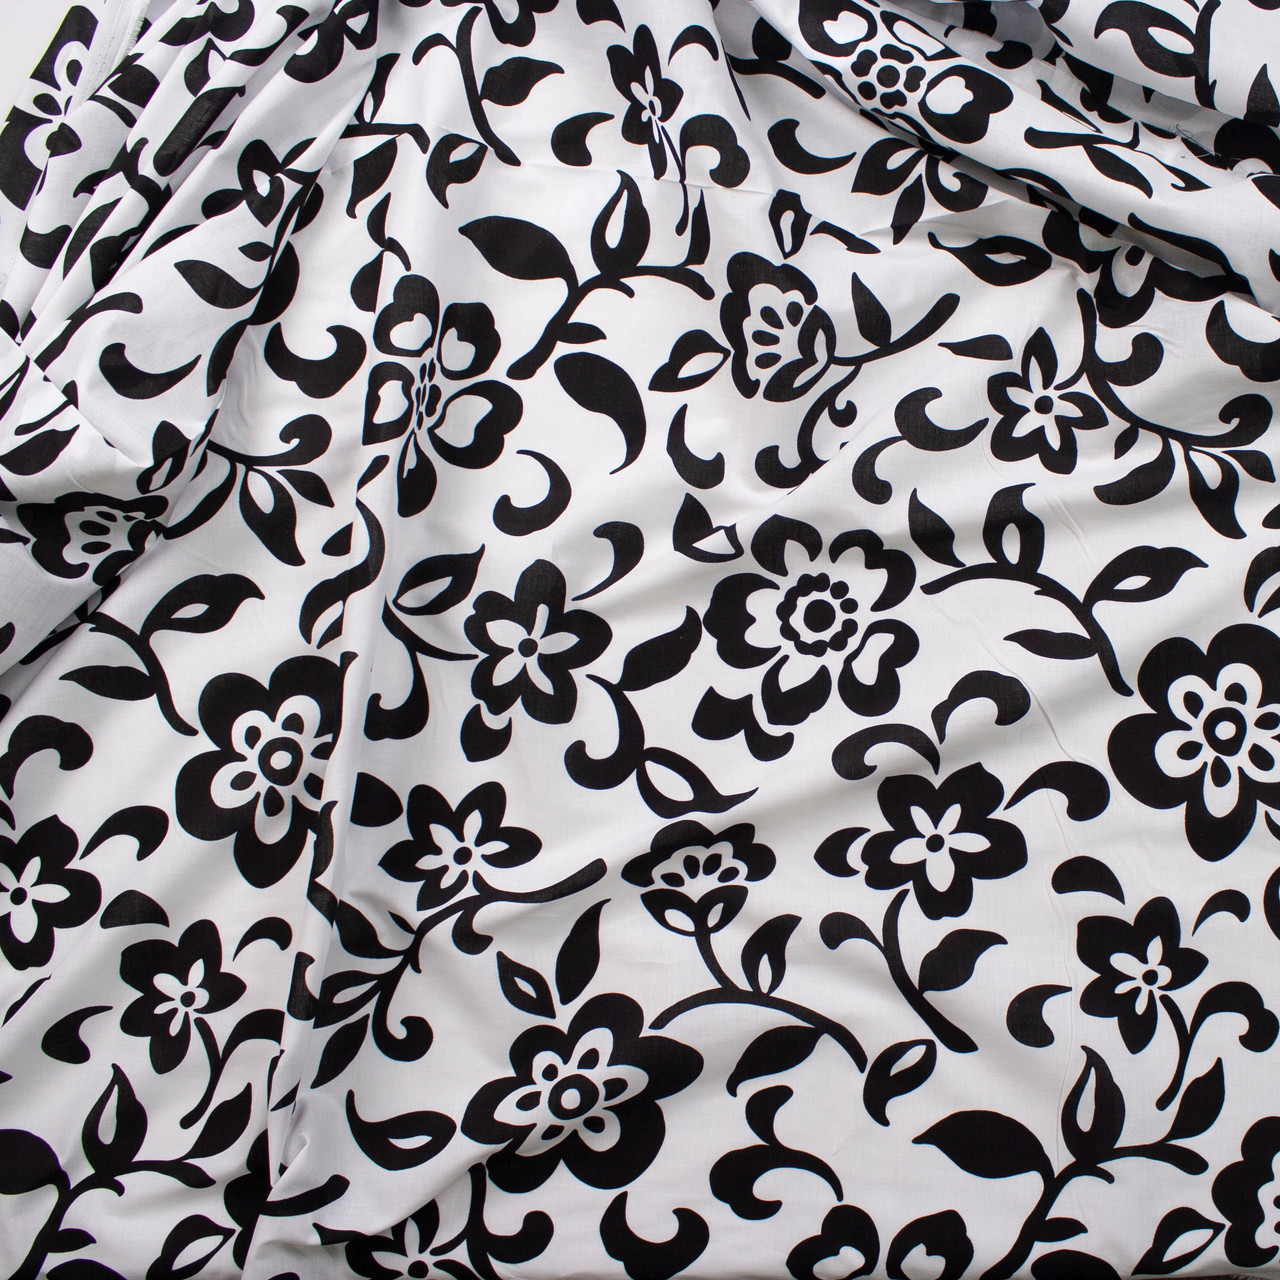 Cali Fabrics Black Scrolling Floral on White Cotton Lawn Fabric by the Yard